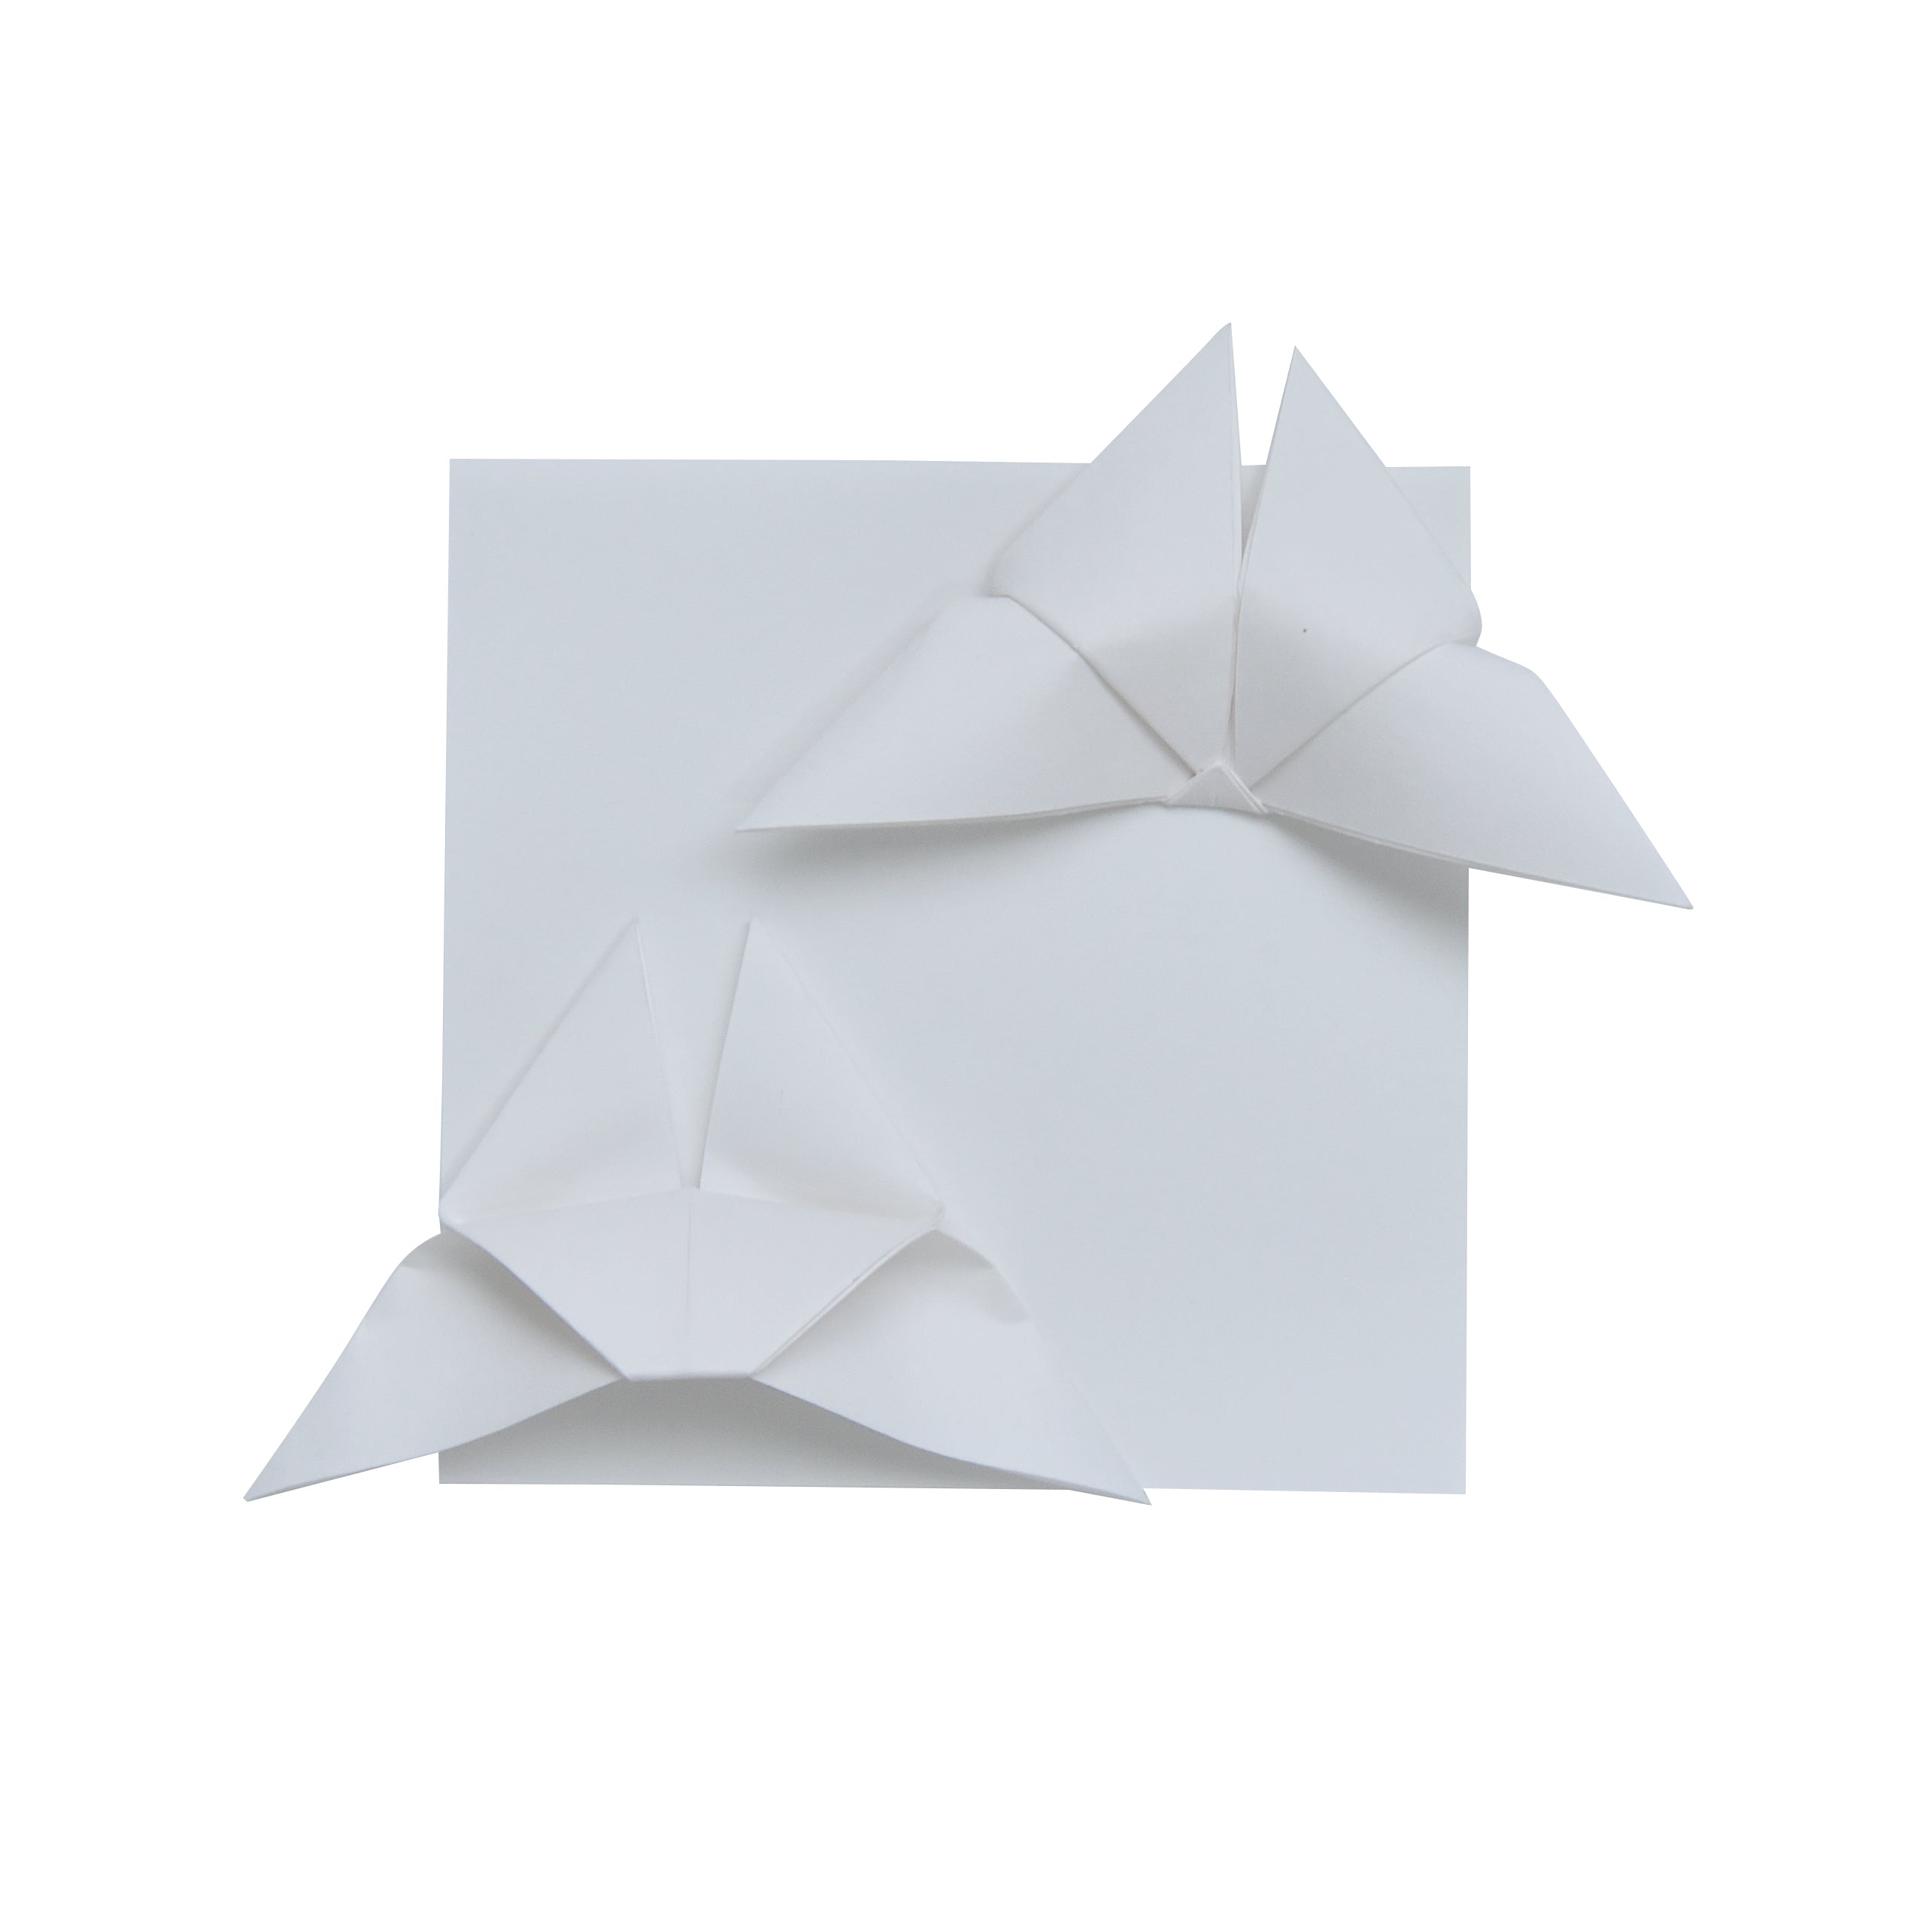 100 Ivory Origami Paper Sheets 3x3 inches Paper Square Pack for Folding, Origami Paper Cranes, Origami Decoration